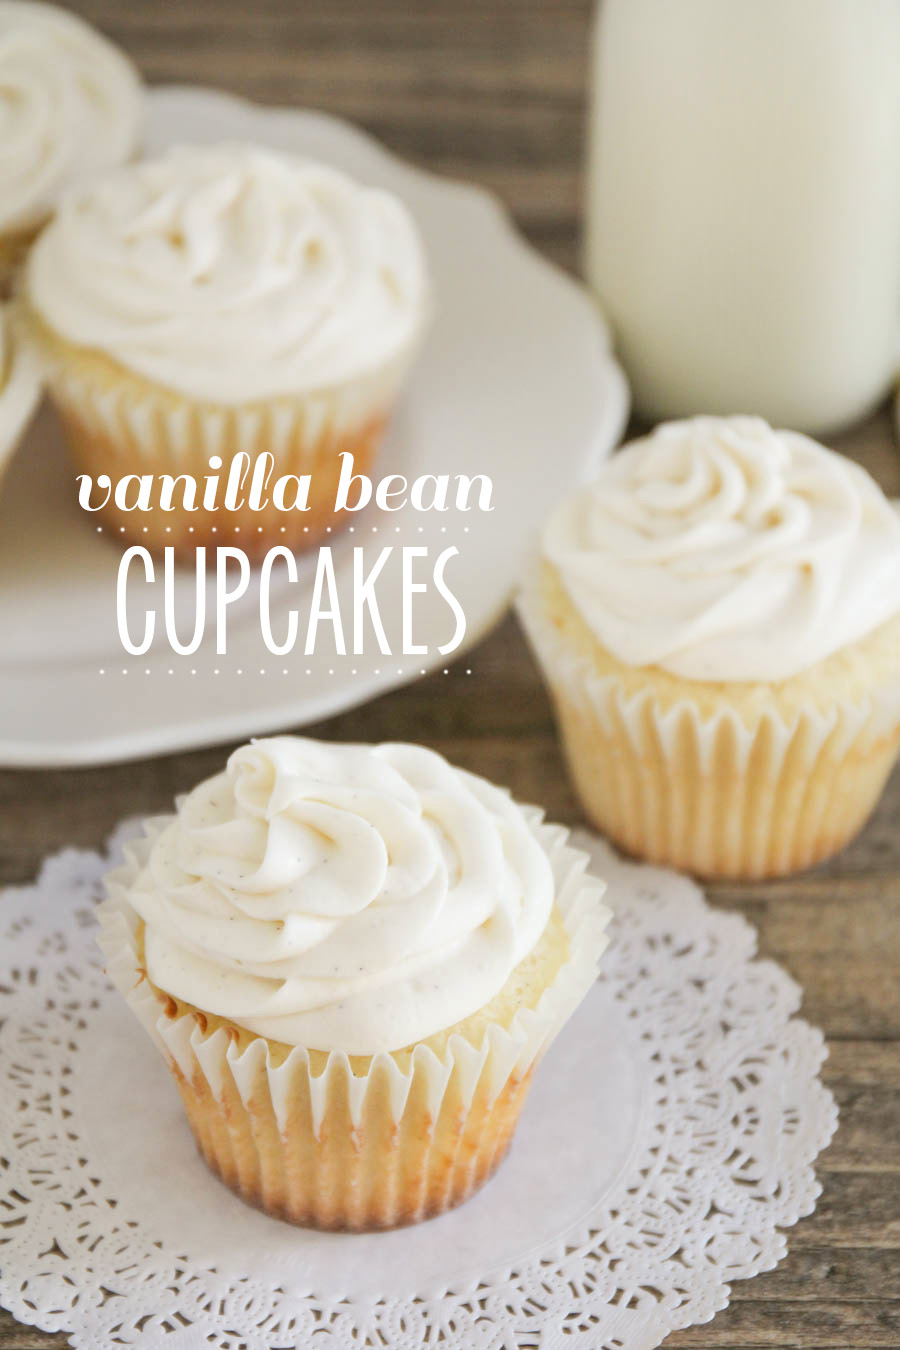 These vanilla bean cupcakes are light and moist, with the perfect tender crumb. The perfect vanilla cupcake!